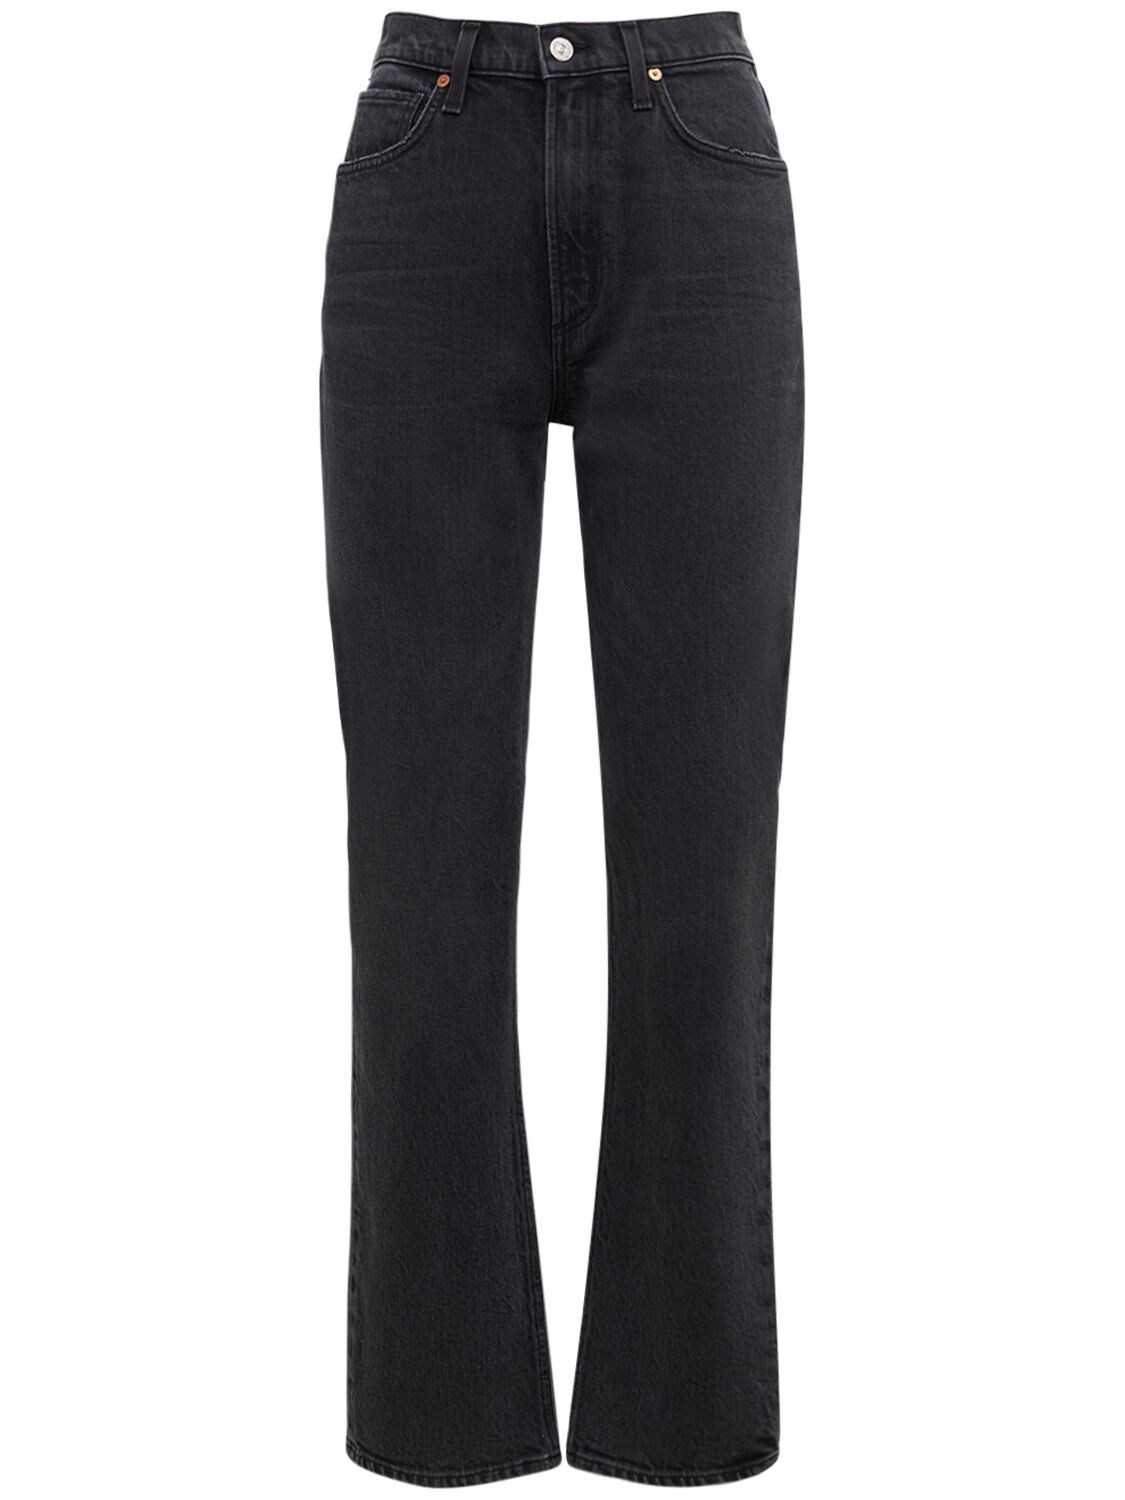 Daphne High Rise Stovepipe Cotton Jeans - CITIZENS OF HUMANITY - Modalova